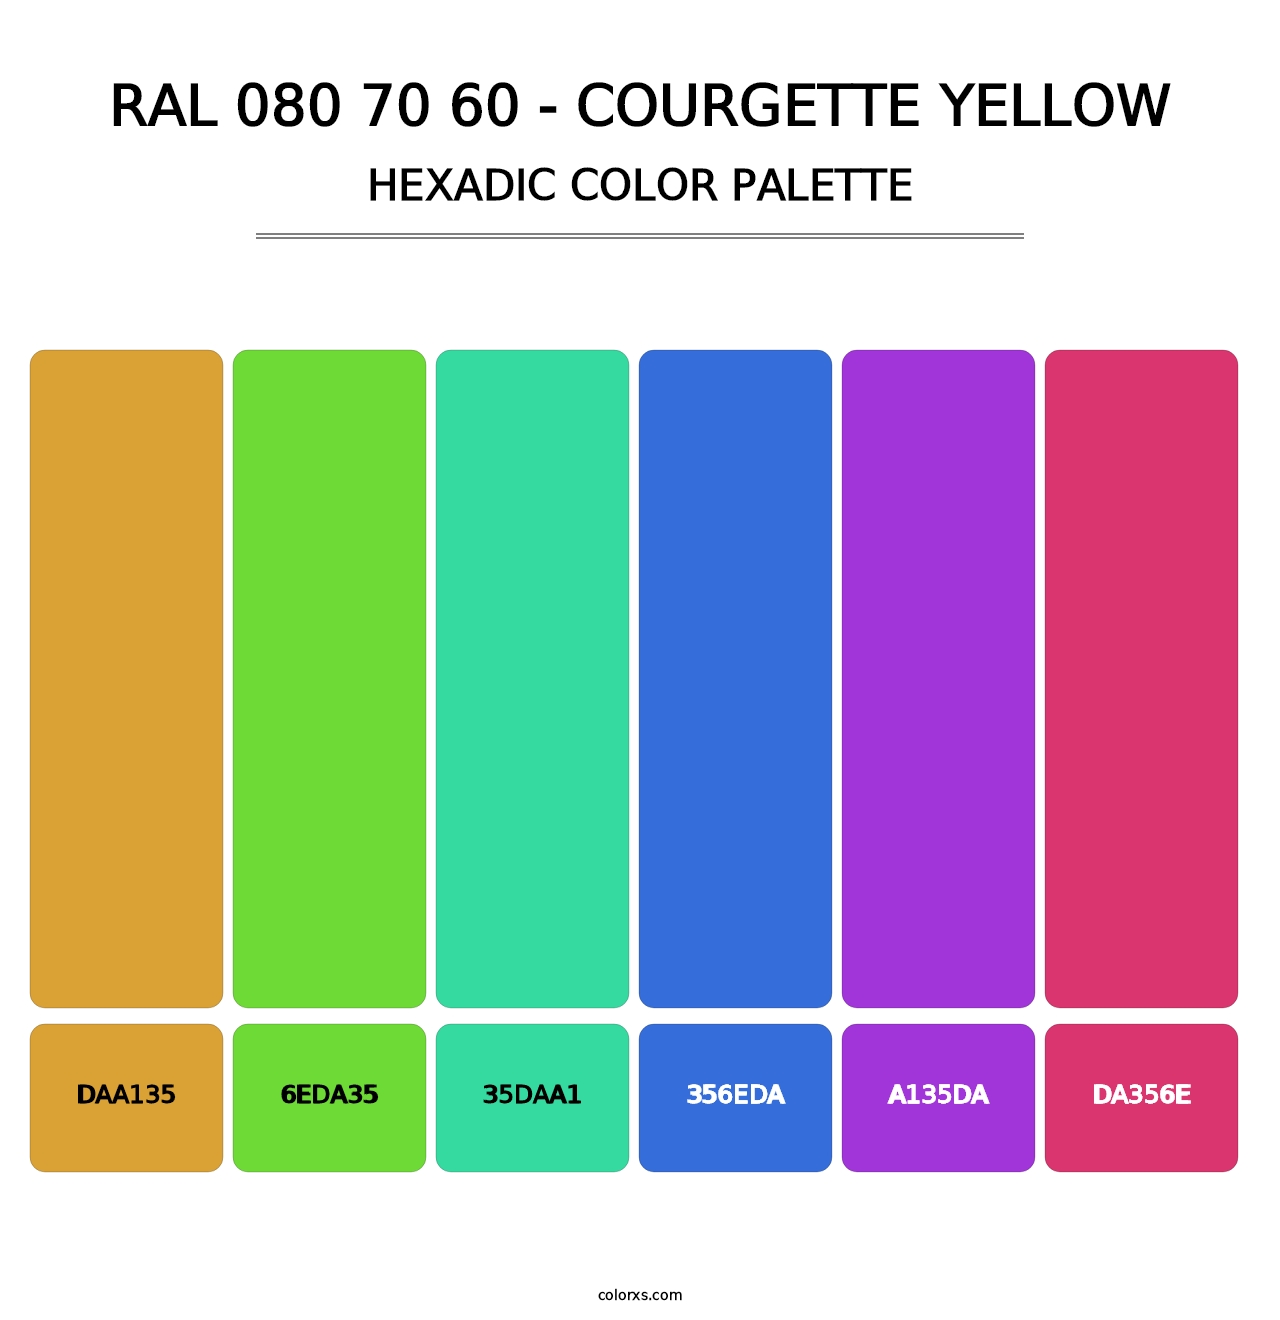 RAL 080 70 60 - Courgette Yellow - Hexadic Color Palette